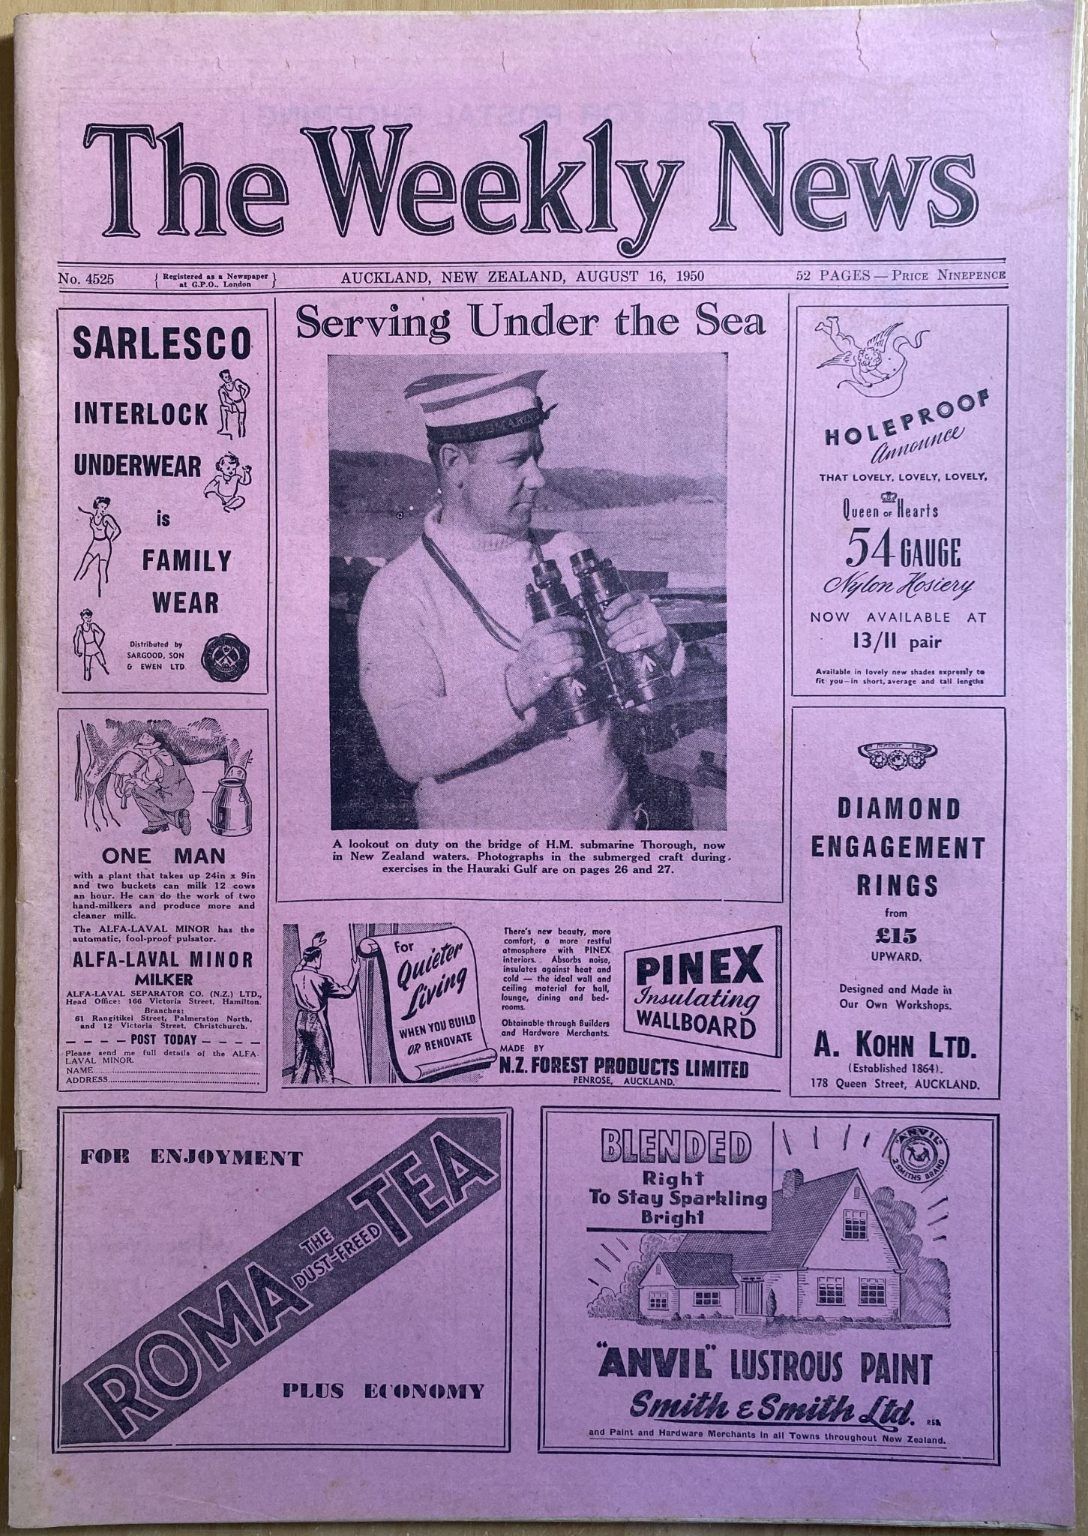 OLD NEWSPAPER: The Weekly News, No. 4525, 16 August 1950